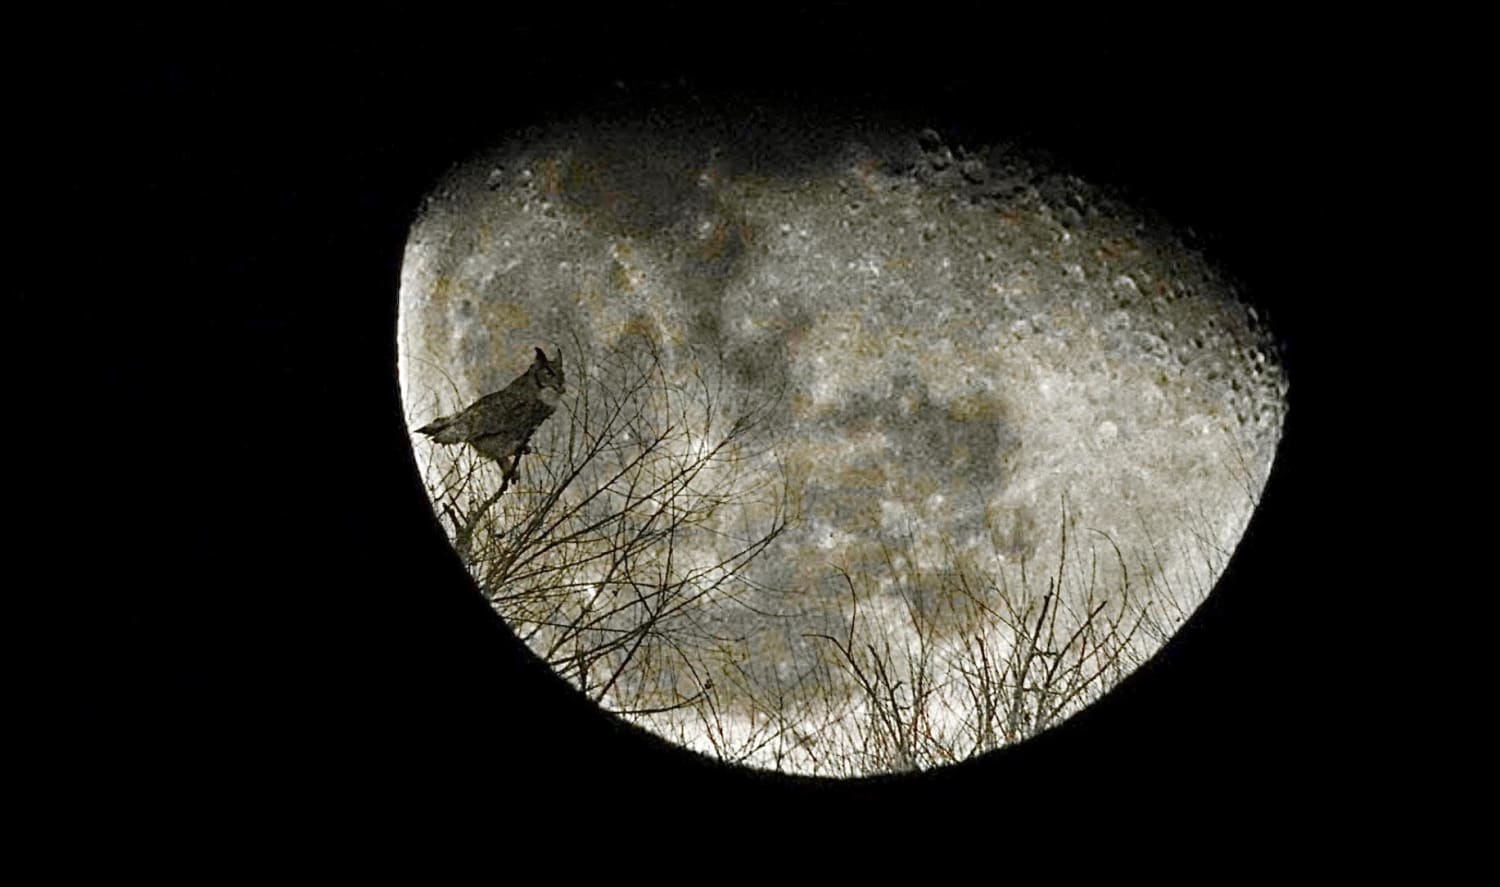 Great Horned Owl captured accidentally while taking night shots of the moon. I only saw him after I digitally zoomed in to check focus! Mind blown! He was 1/2 mile away! If I had snapped the moon 2 minutes later I would not have seen him because moon would have been above the tree line!